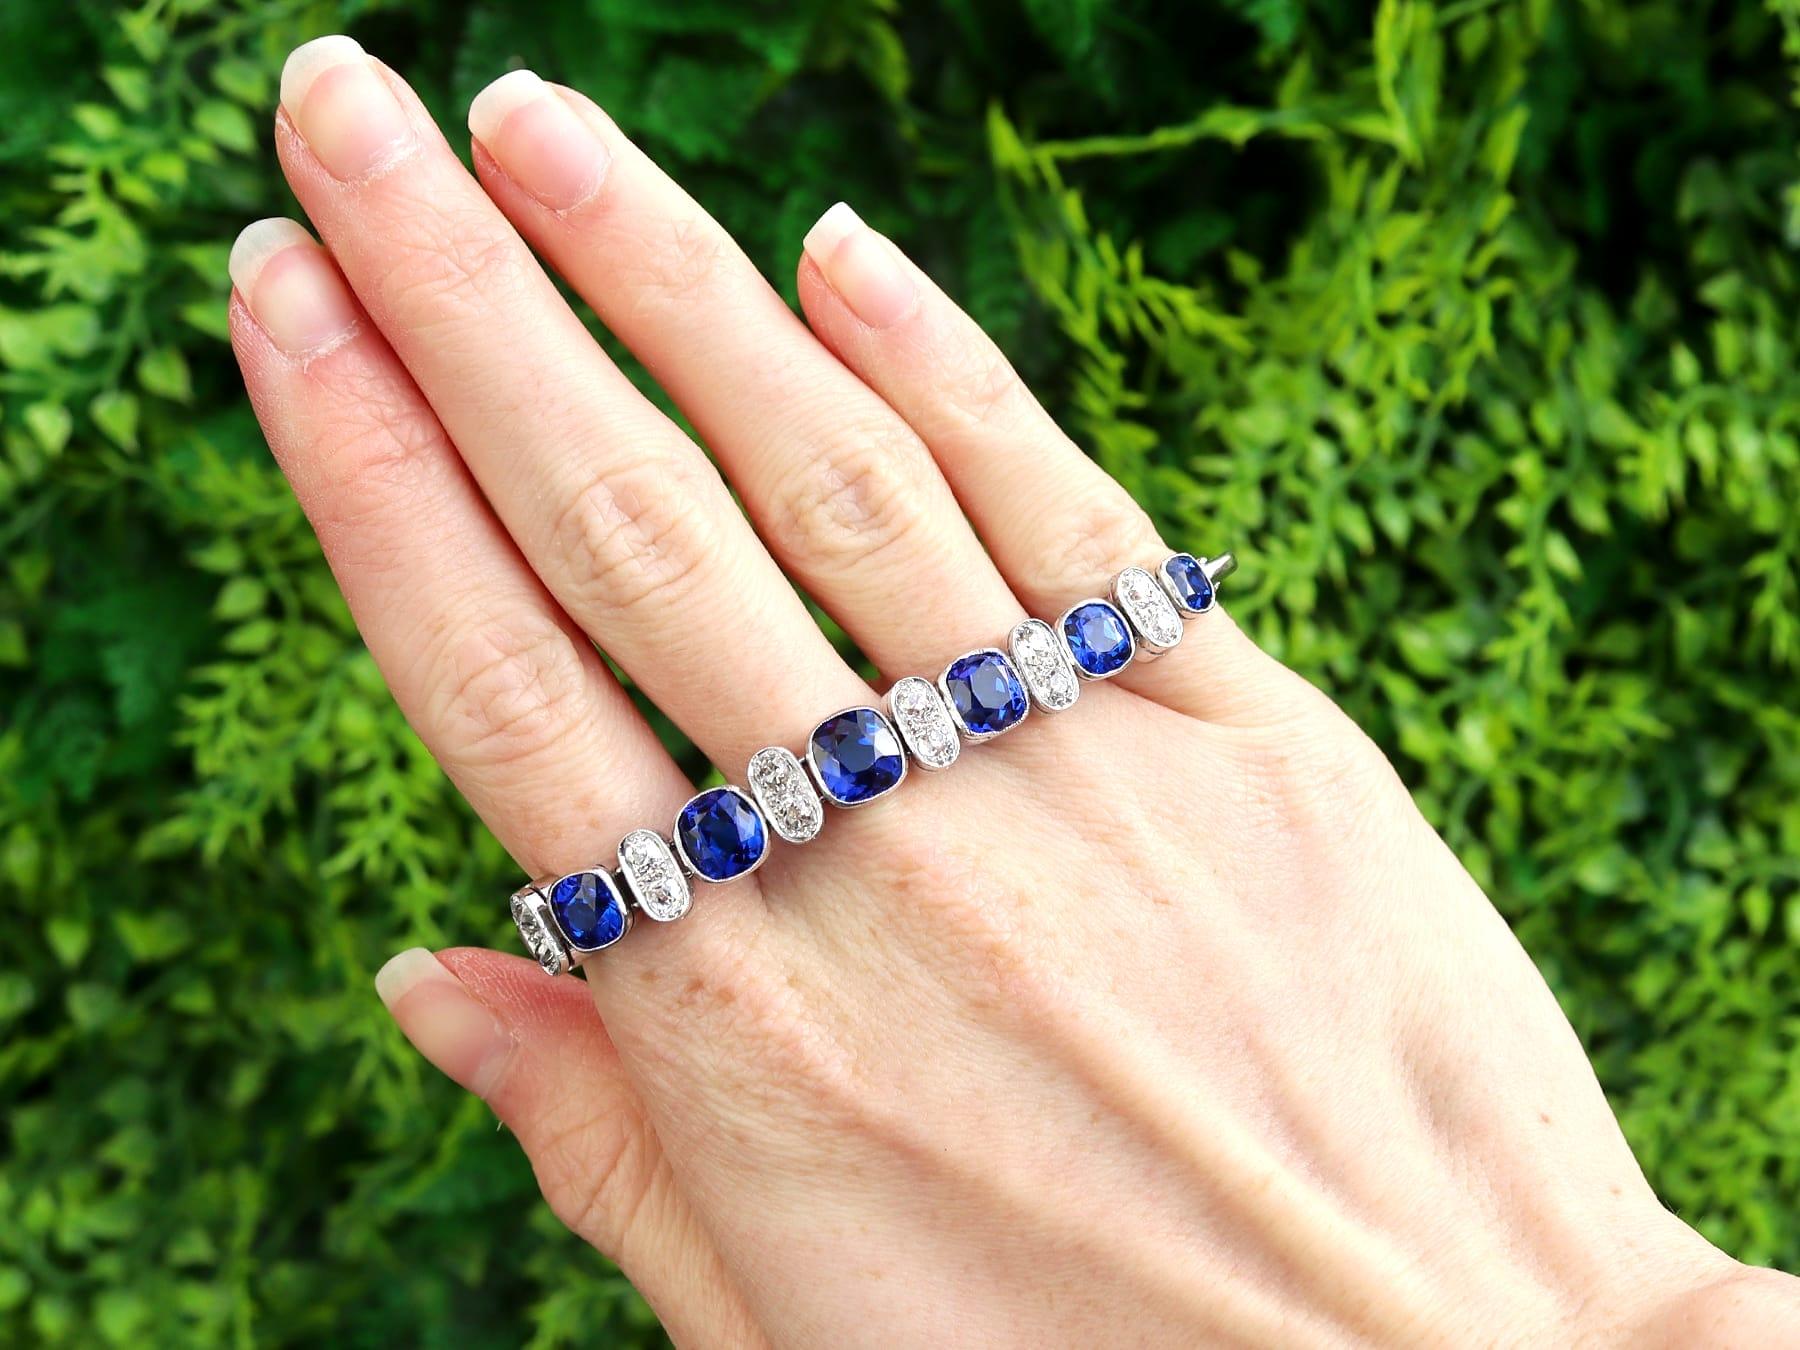 A stunning, fine and impressive synthetic blue spinel and 2.04 carat diamond, 18 karat white gold bracelet; part of our diverse gemstone jewelry and estate jewelry collections.

This stunning, fine and impressive antique bracelet has been crafted in